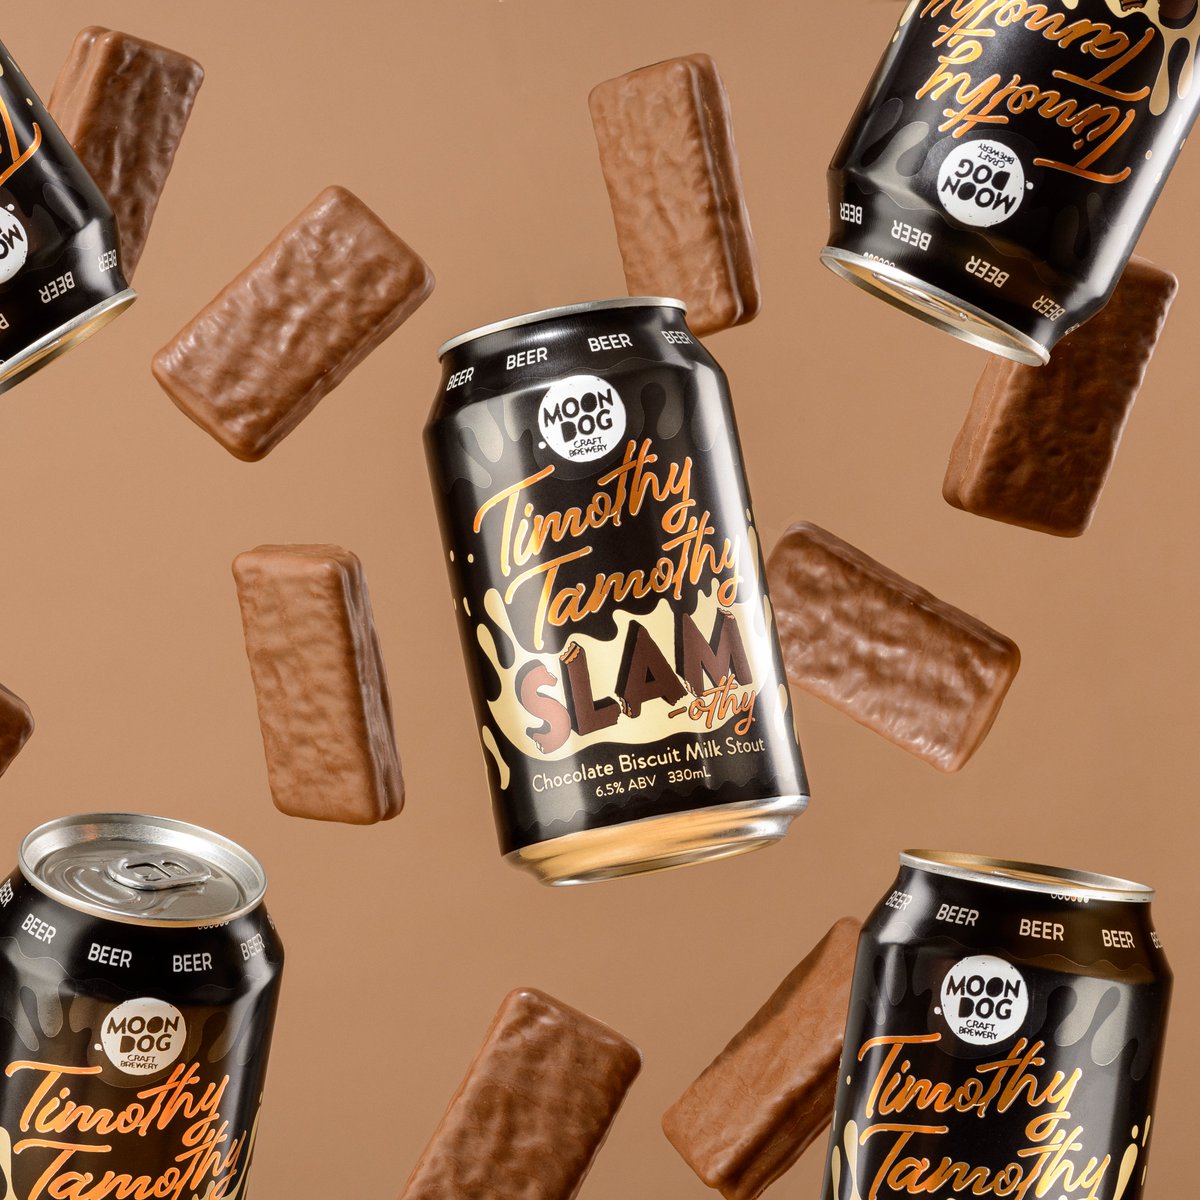 Timothy Tamothy Slamothy Chocolate Biscuit Milk Stout is back and the third rendition of our glorious bikkie beer does not disappoint! Think chocolate-y, biscuit-y, beer-y goodness! Head here to shop: bitly.com/MoonDogStore